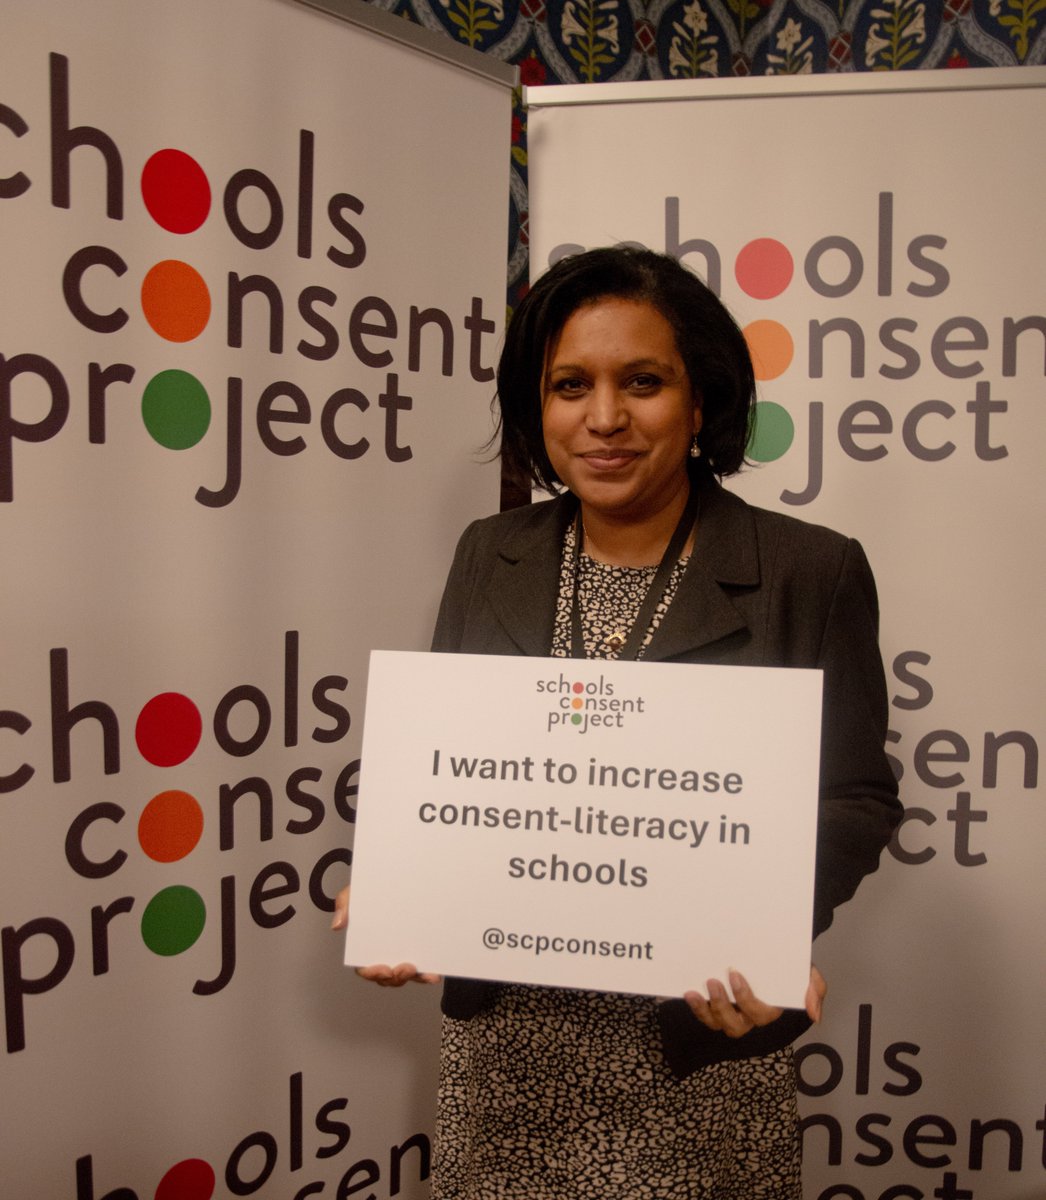 Thanks so much for attending our event in Parliament last Monday @JanetDaby! We’re looking forward to working with schools in your constituency